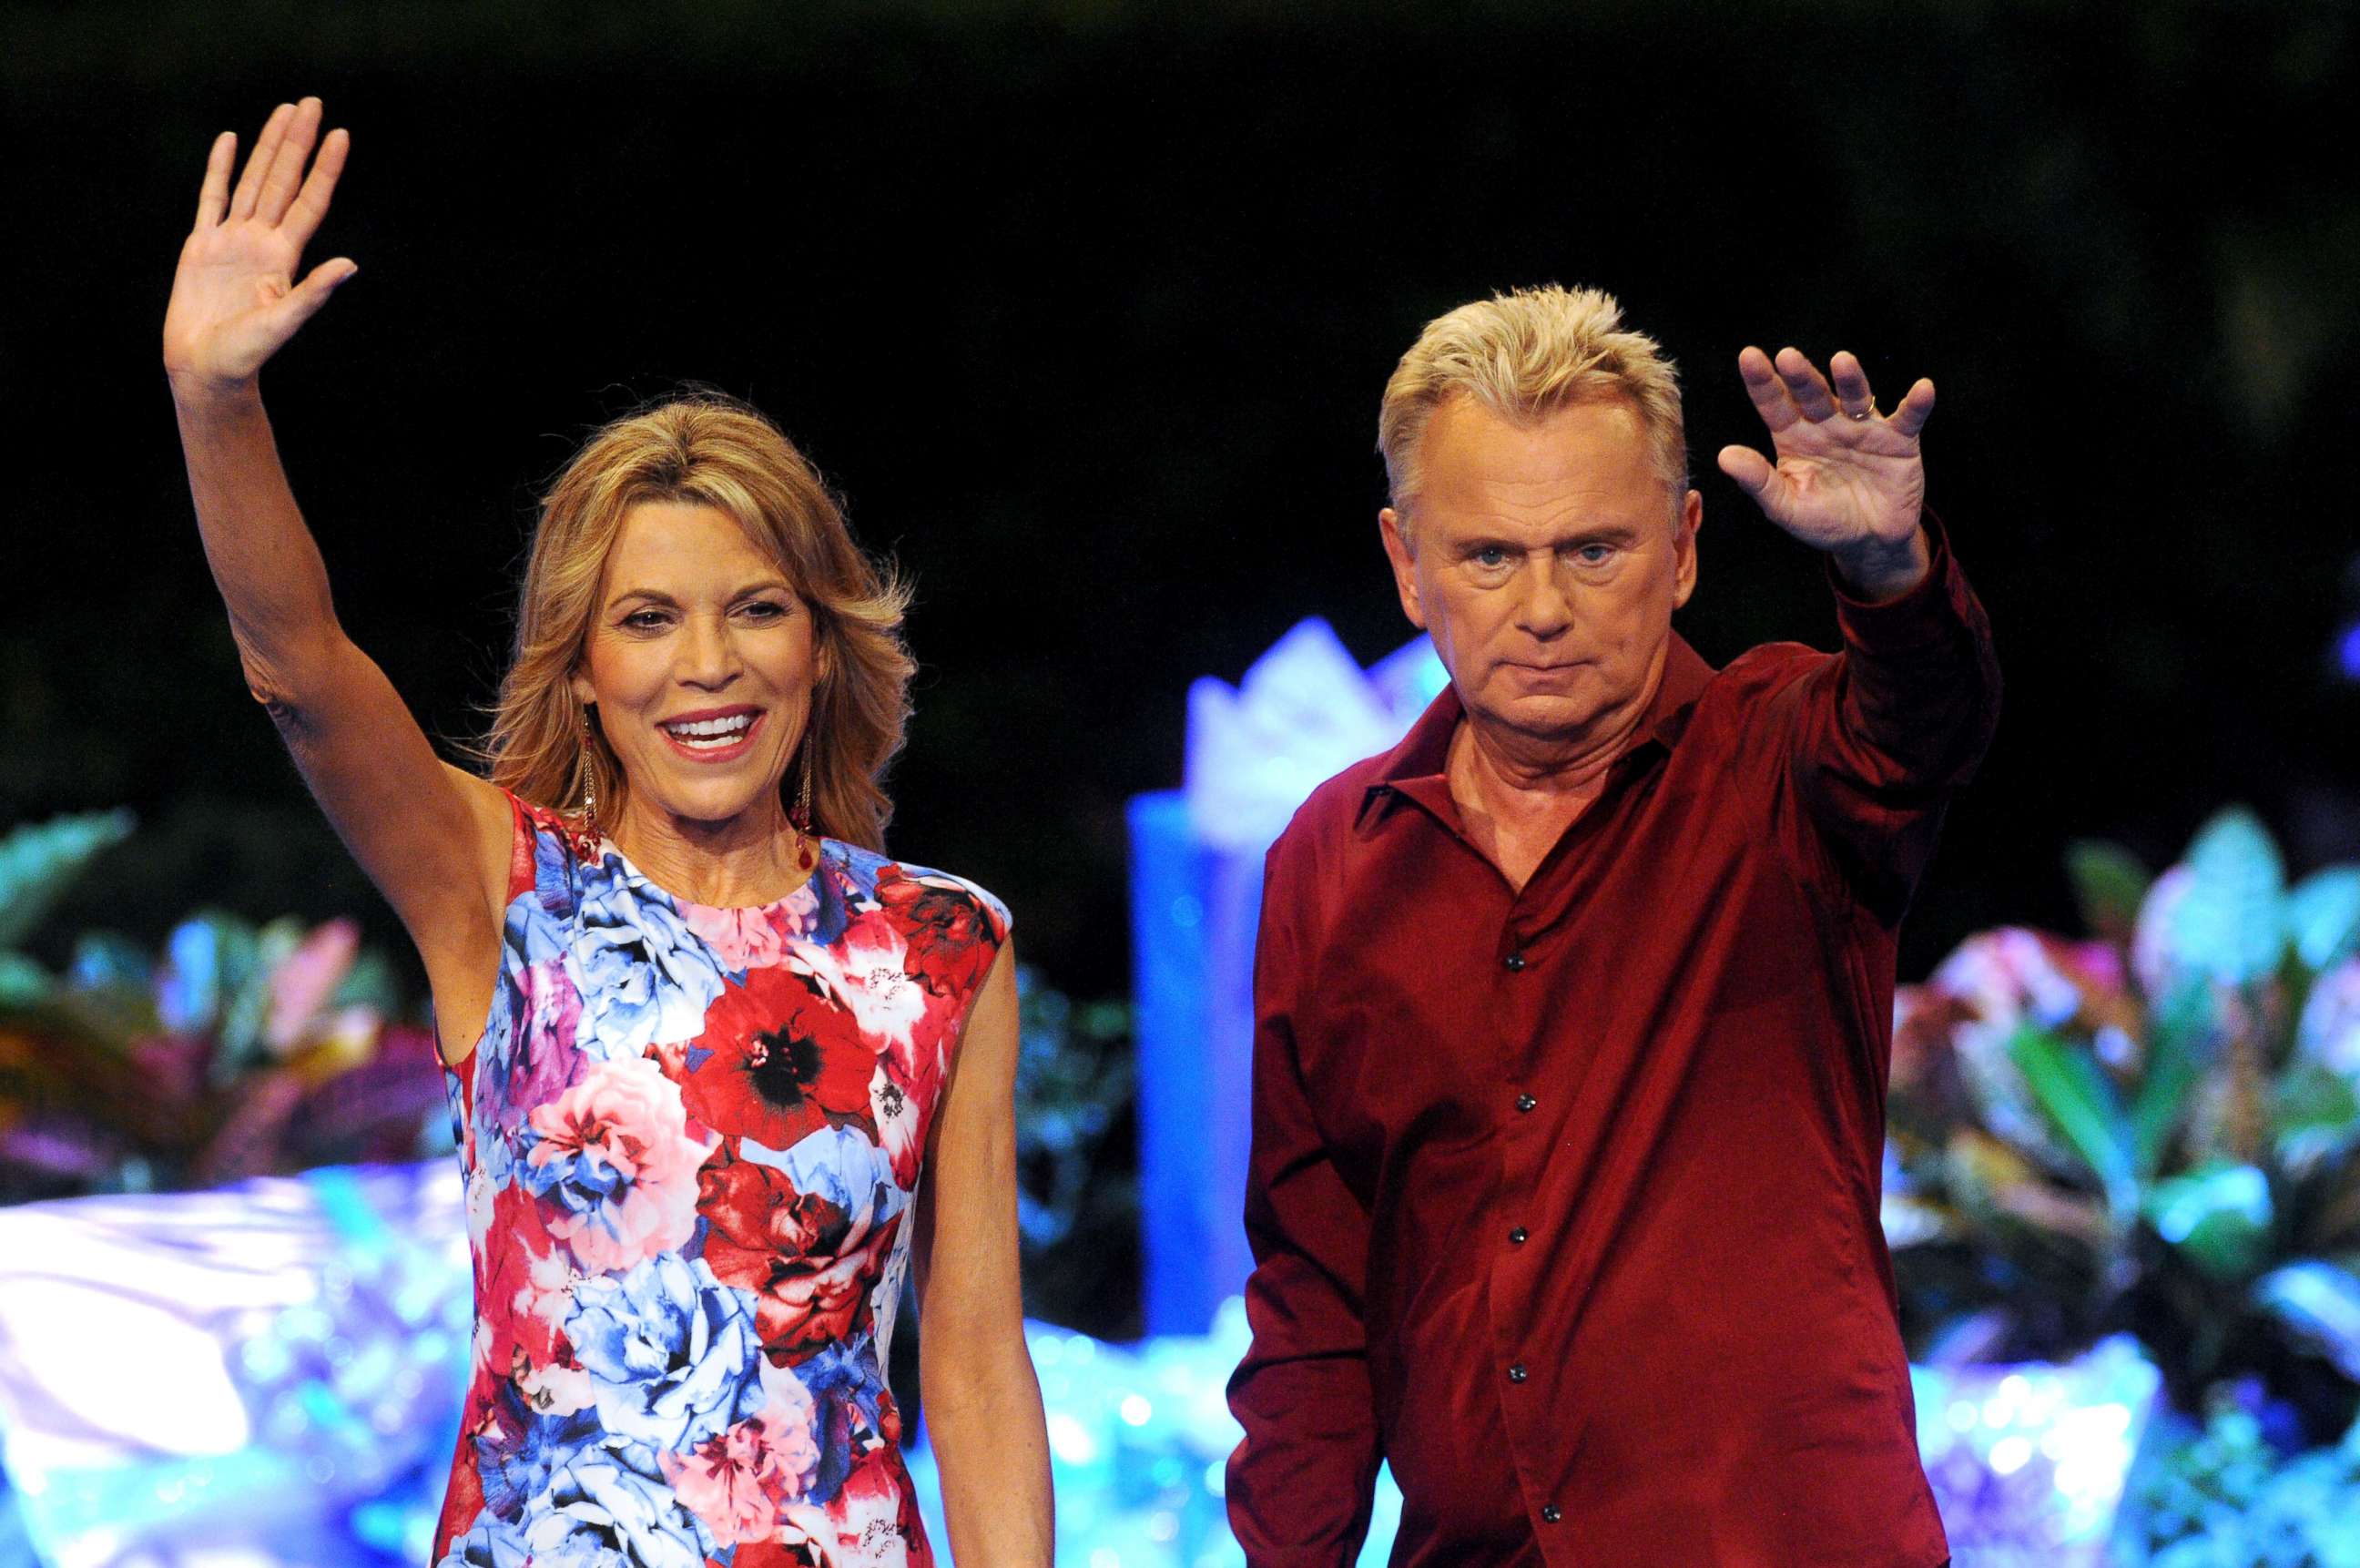 PHOTO: "Wheel of Fortune" hosts Vanna White and Pat Sajak attend a taping of the Wheel of Fortune's 35th Anniversary at Walt Disney World, Oct. 10, 2017, in Orlando, Florida.